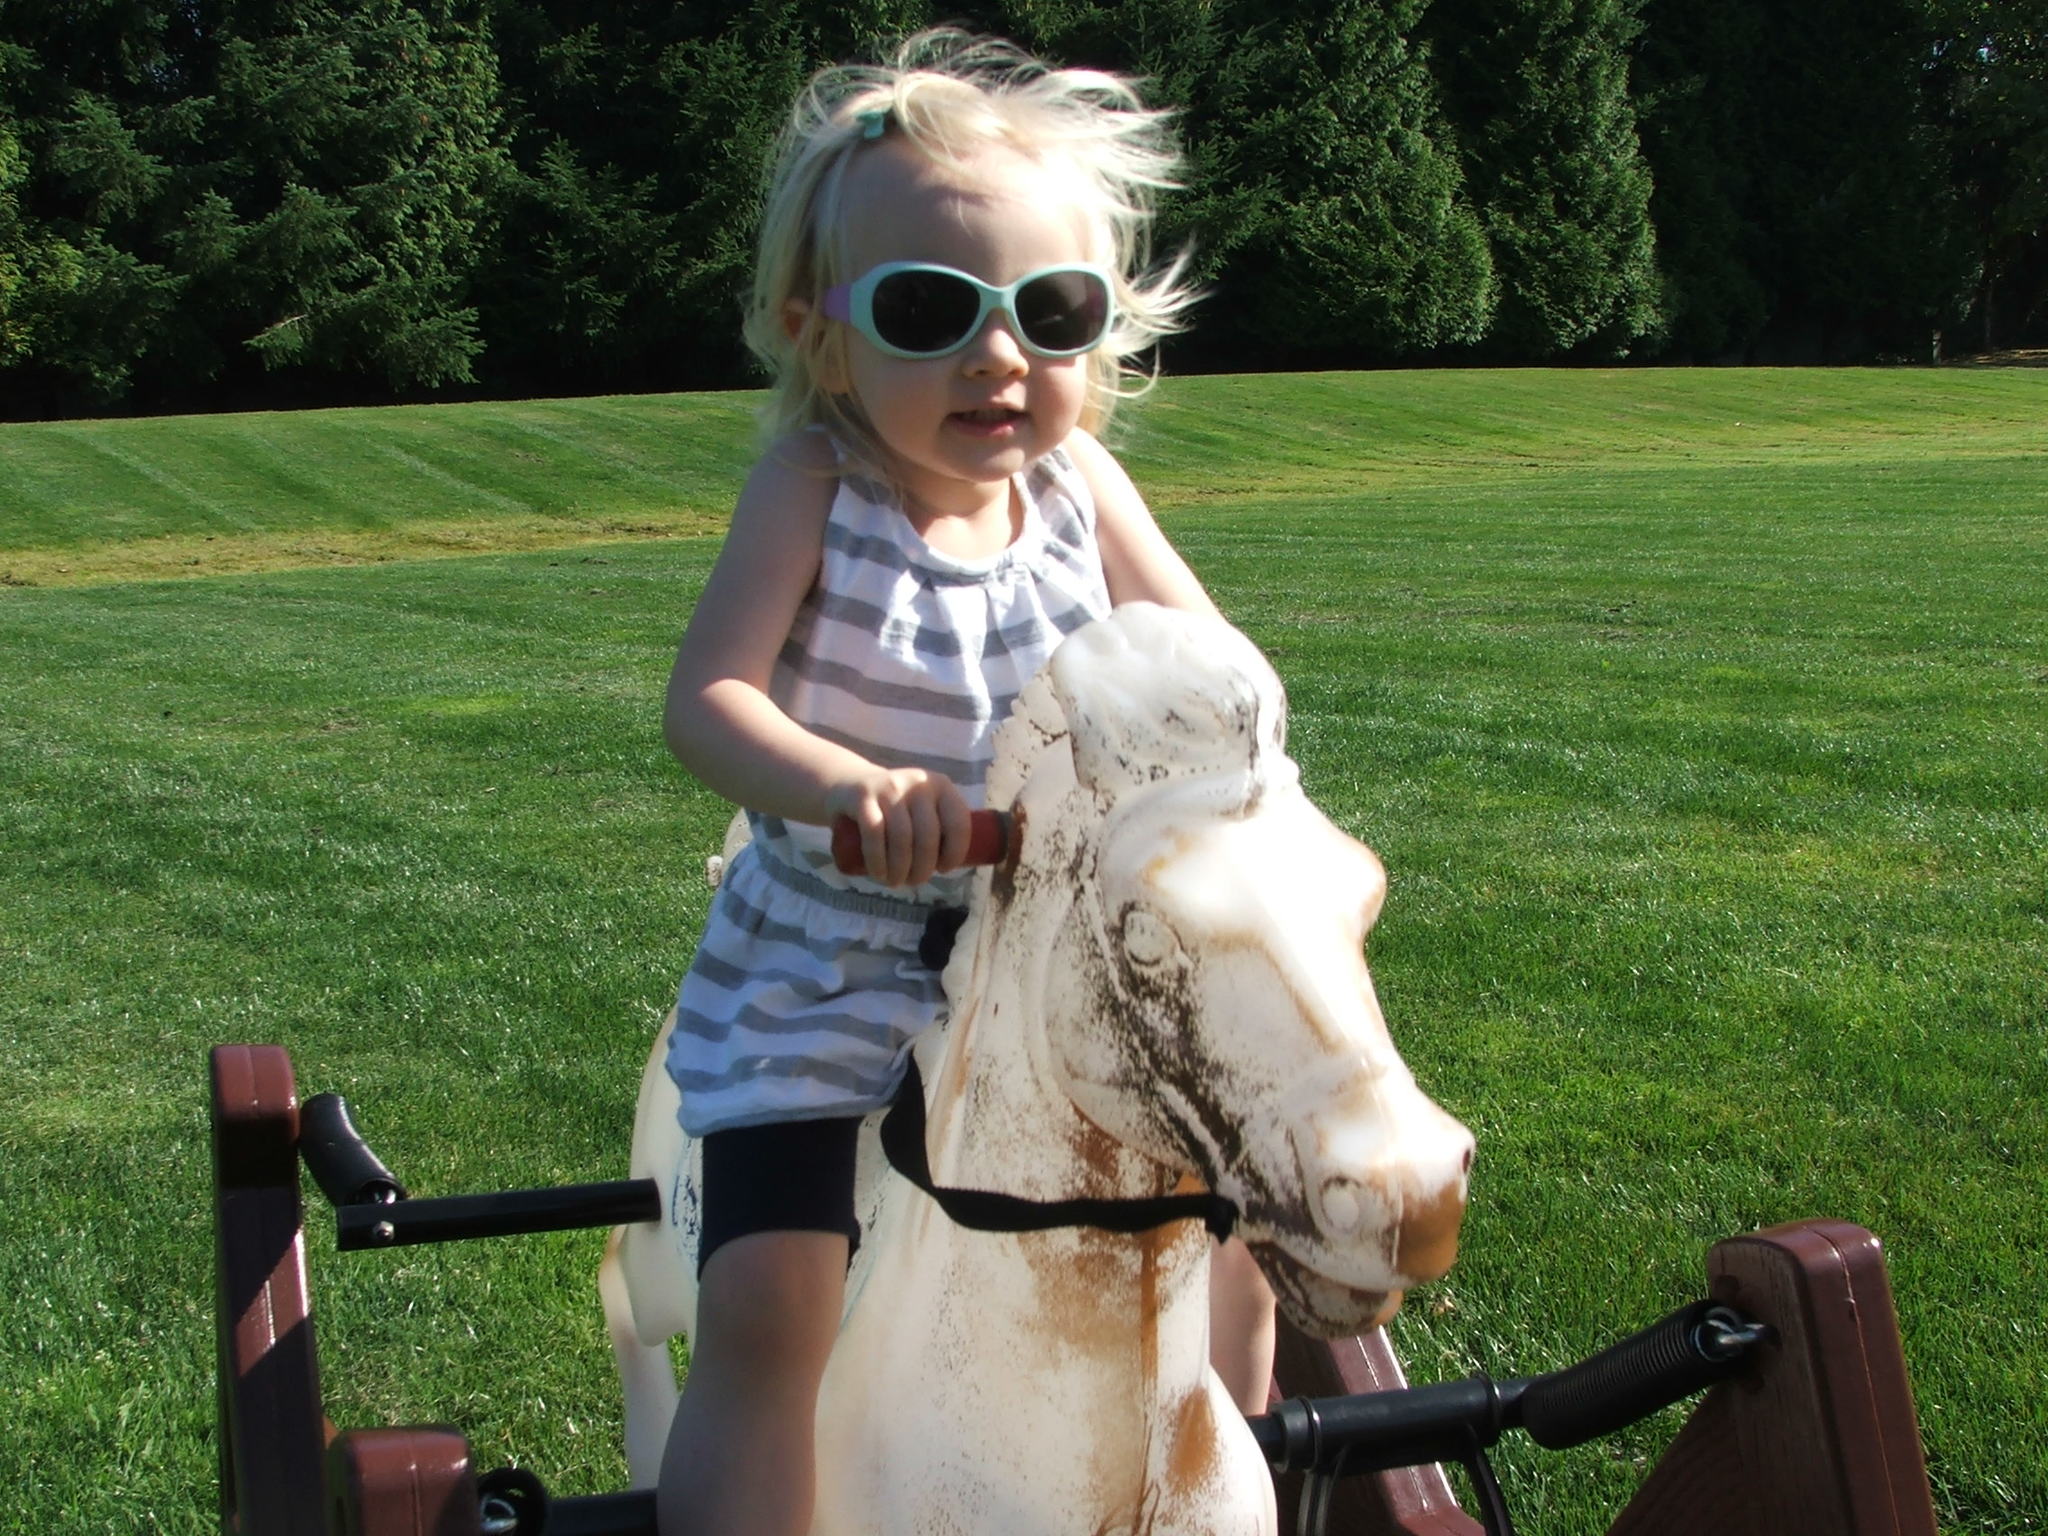 Lily Isenhaur of Redmond rides a toy horse during Kindering’s graduation ceremony and celebration Aug. 16 at Crossroads Park in Bellevue. Courtesy photo